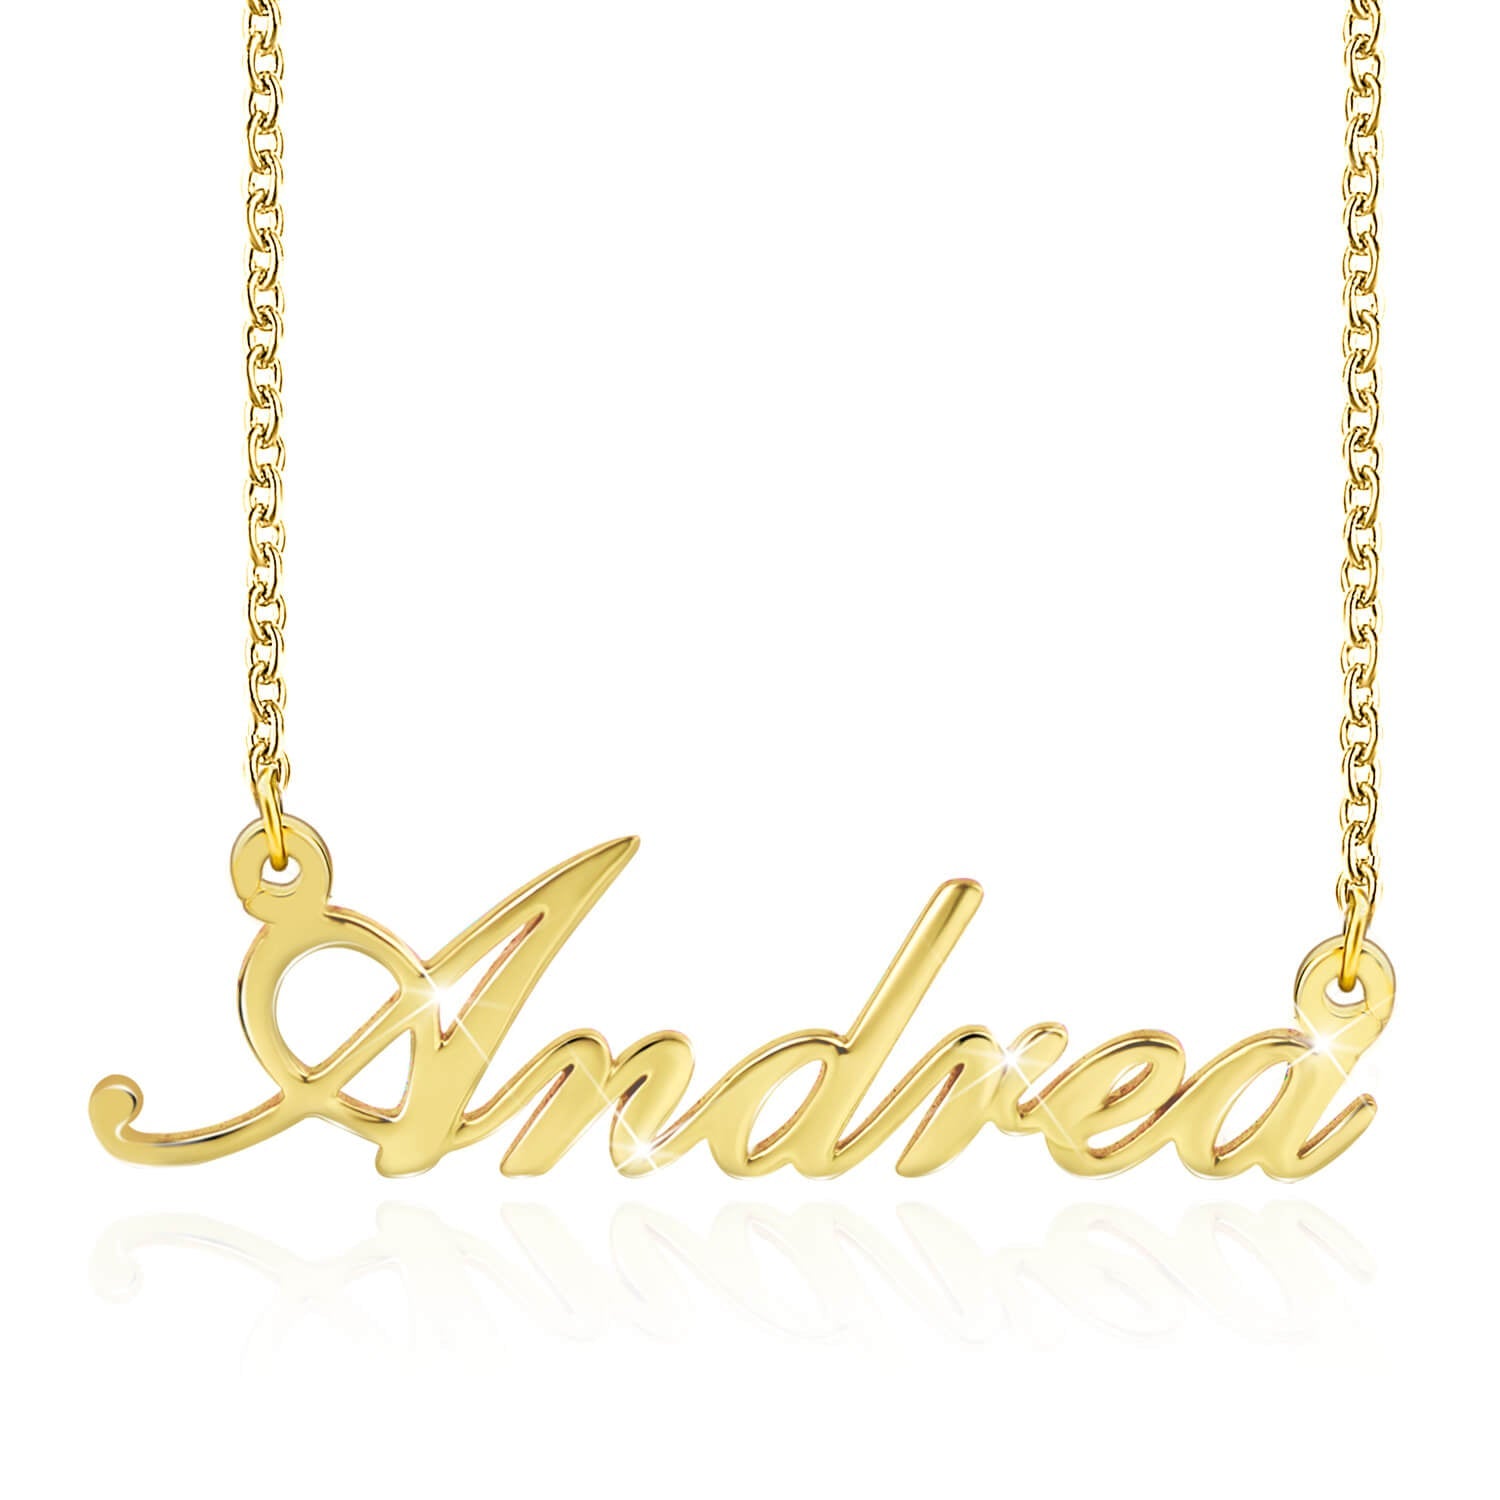 Personalized Custom Gold Plated Name Necklace Jewelry for Women Girl-silviax